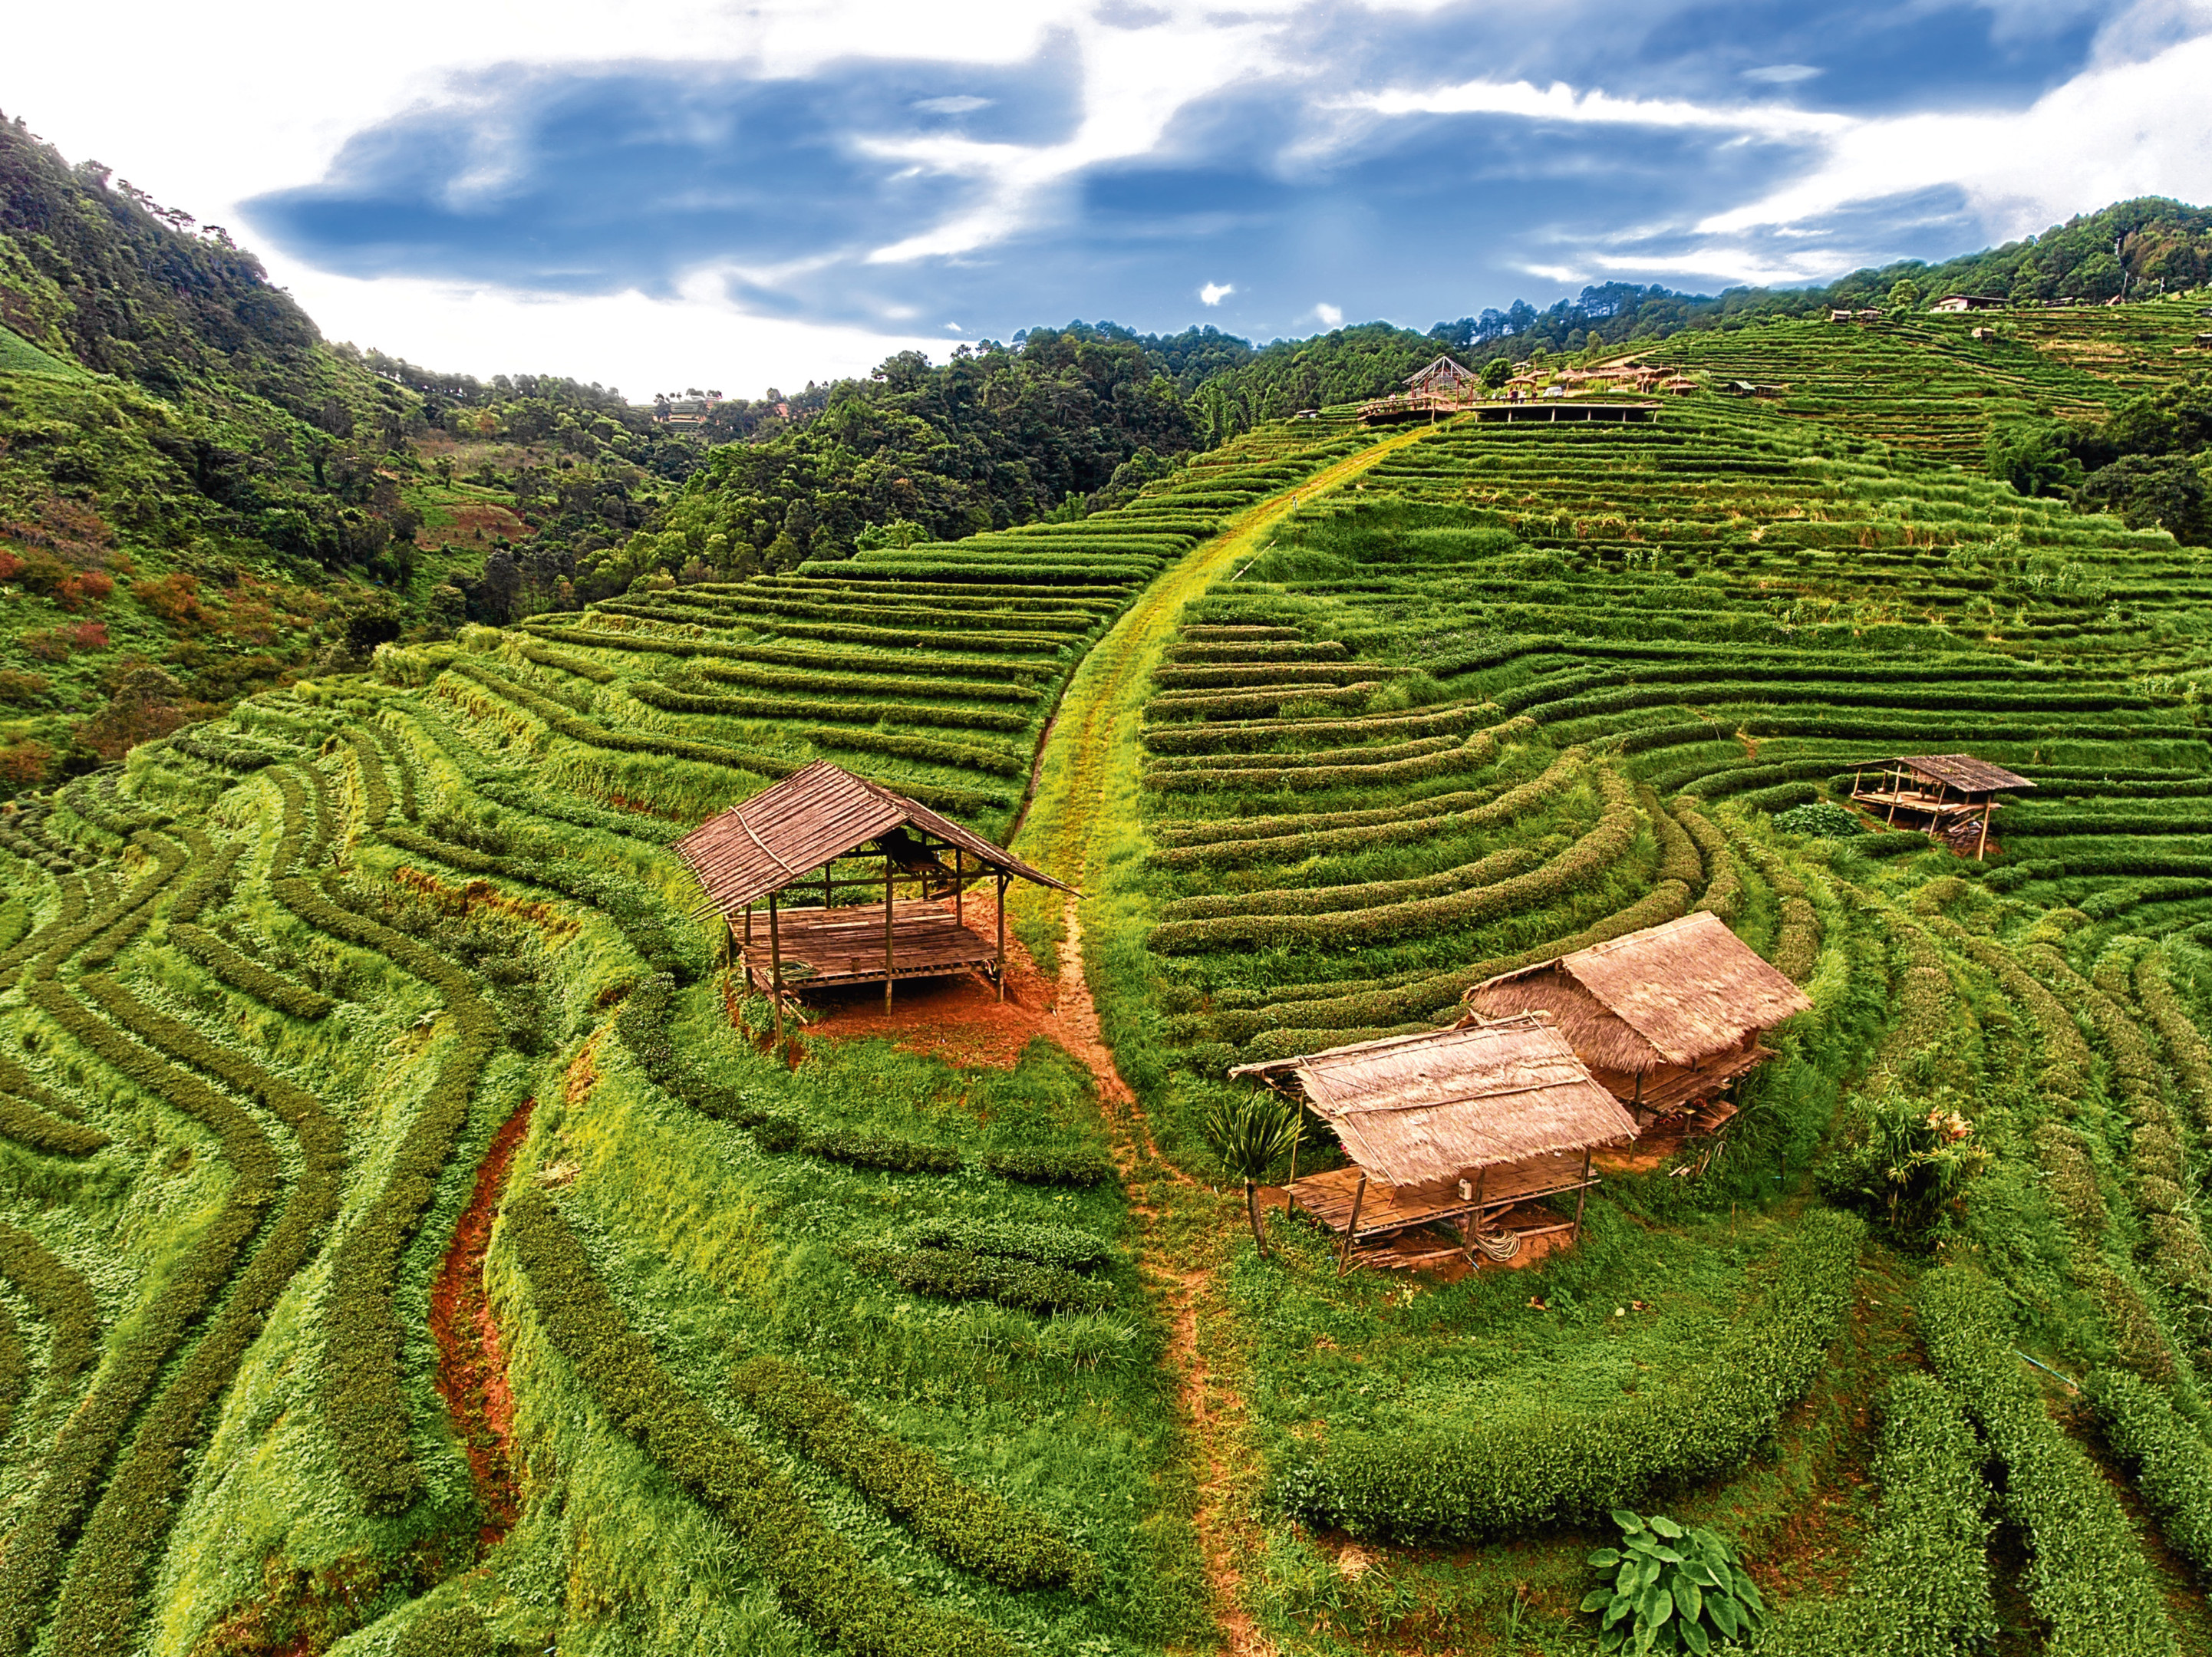 Tea plantation terrace in Chiang Mai, Thailand (Getty Images)